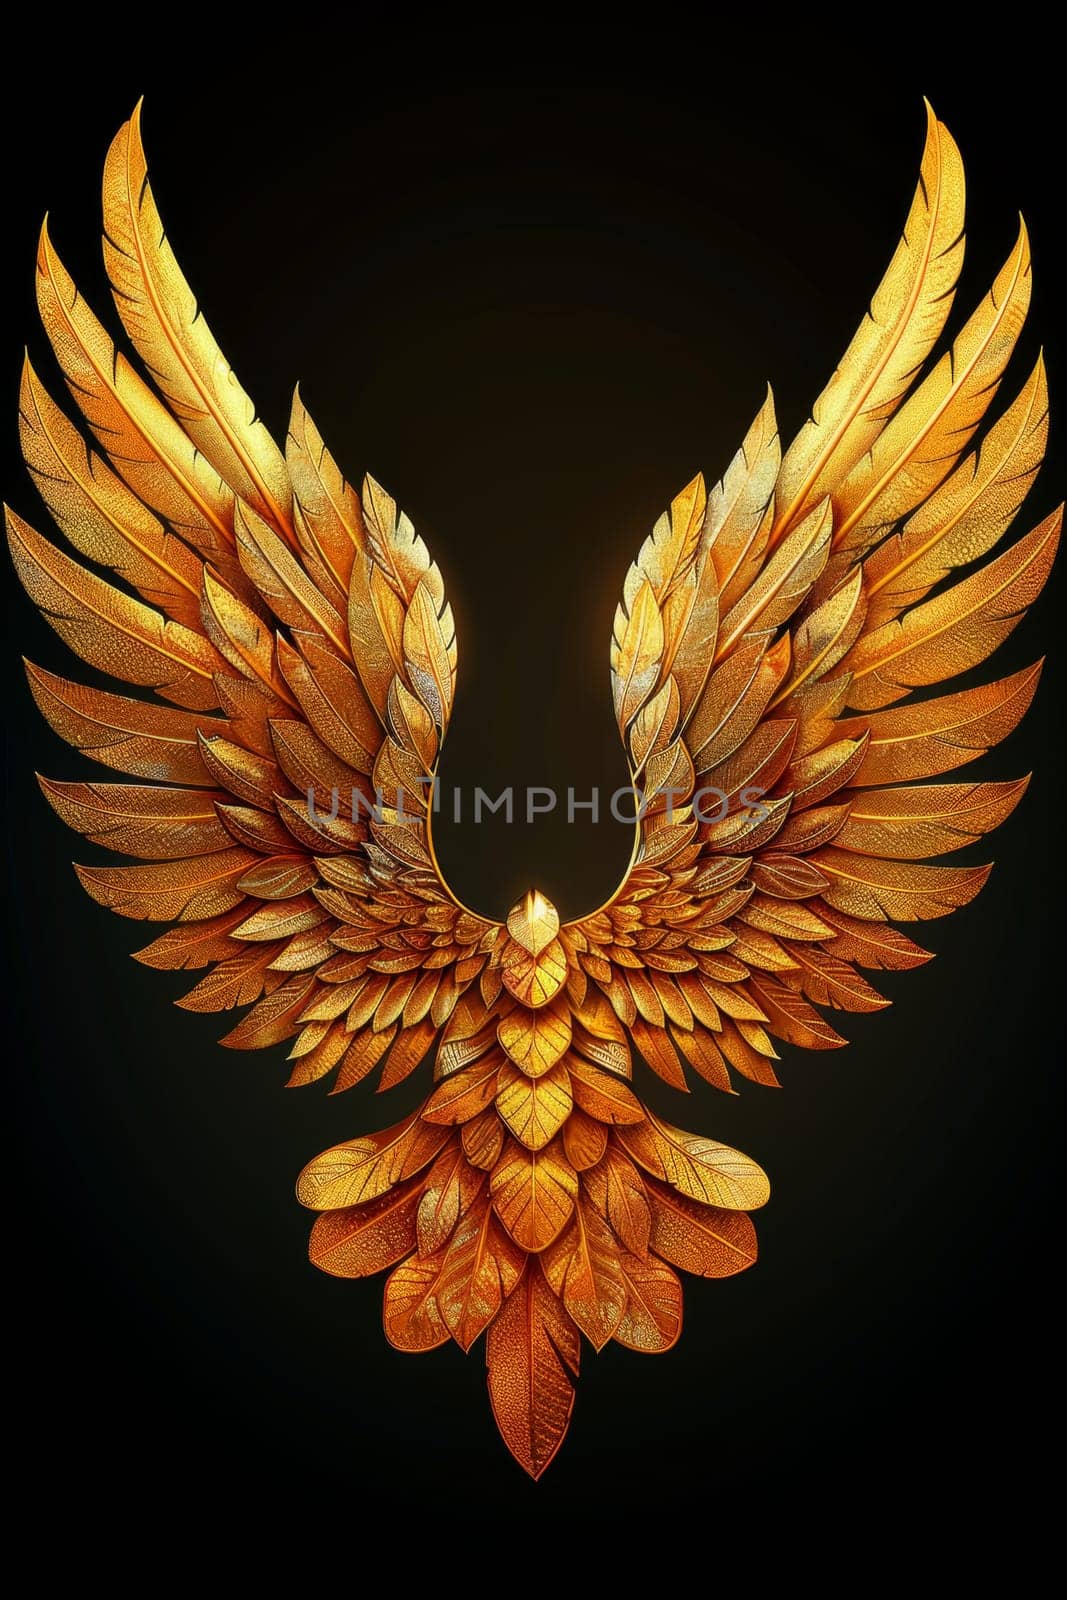 A bird with golden wings on a black background. Illustration by Lobachad